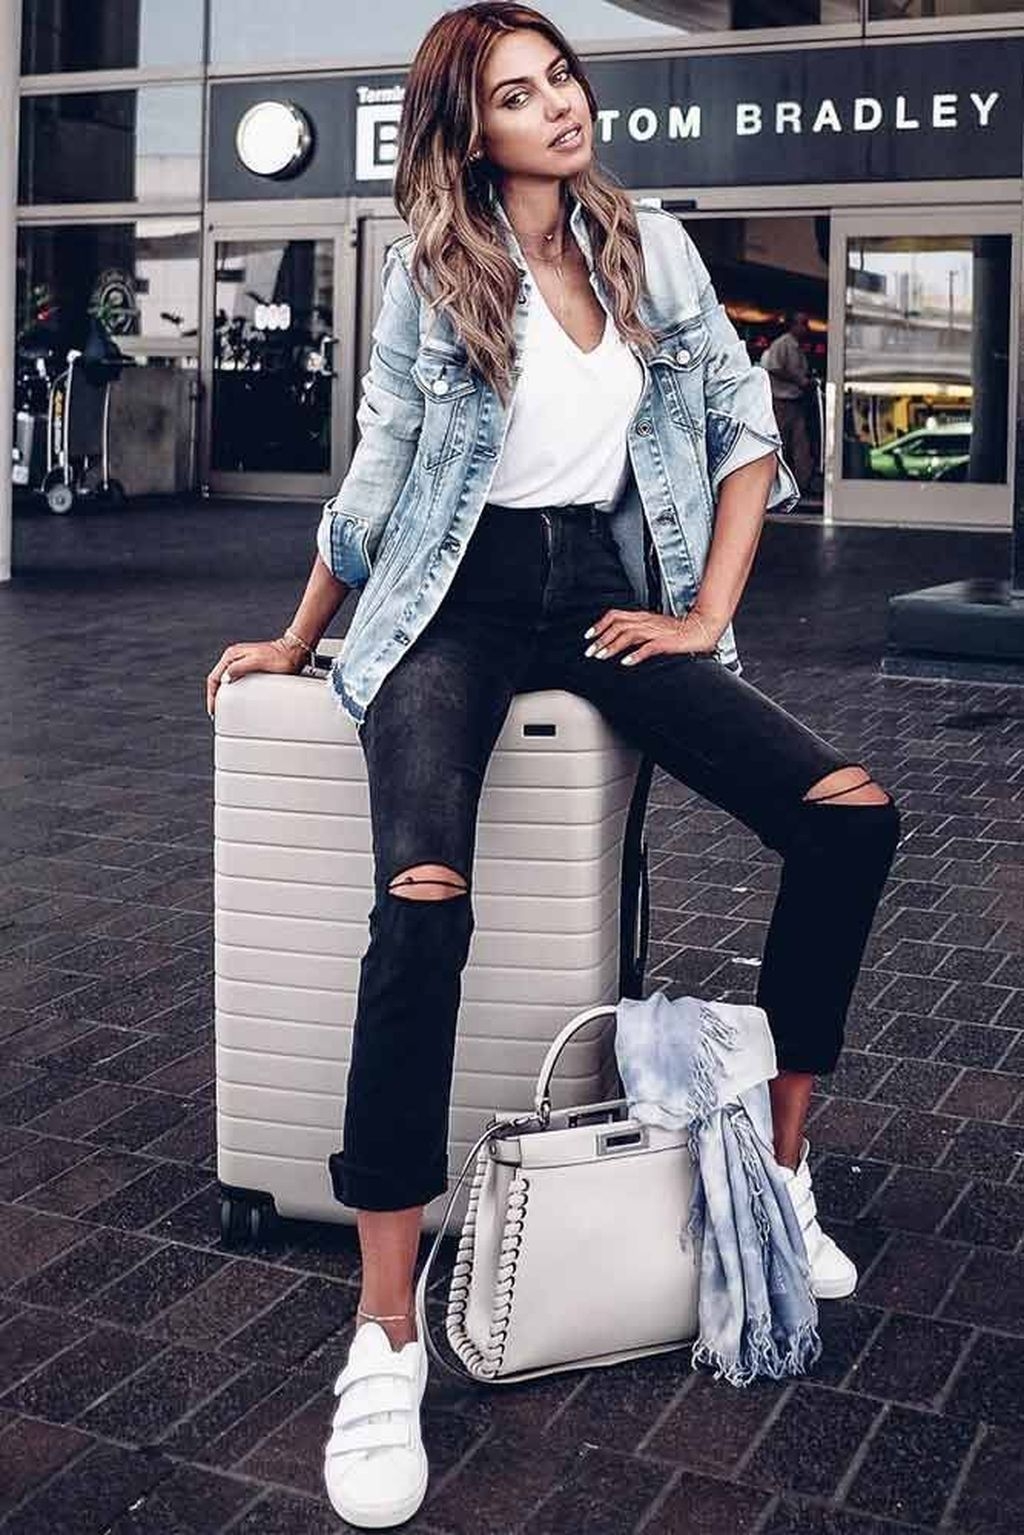 comfy airport travel outfit ideas